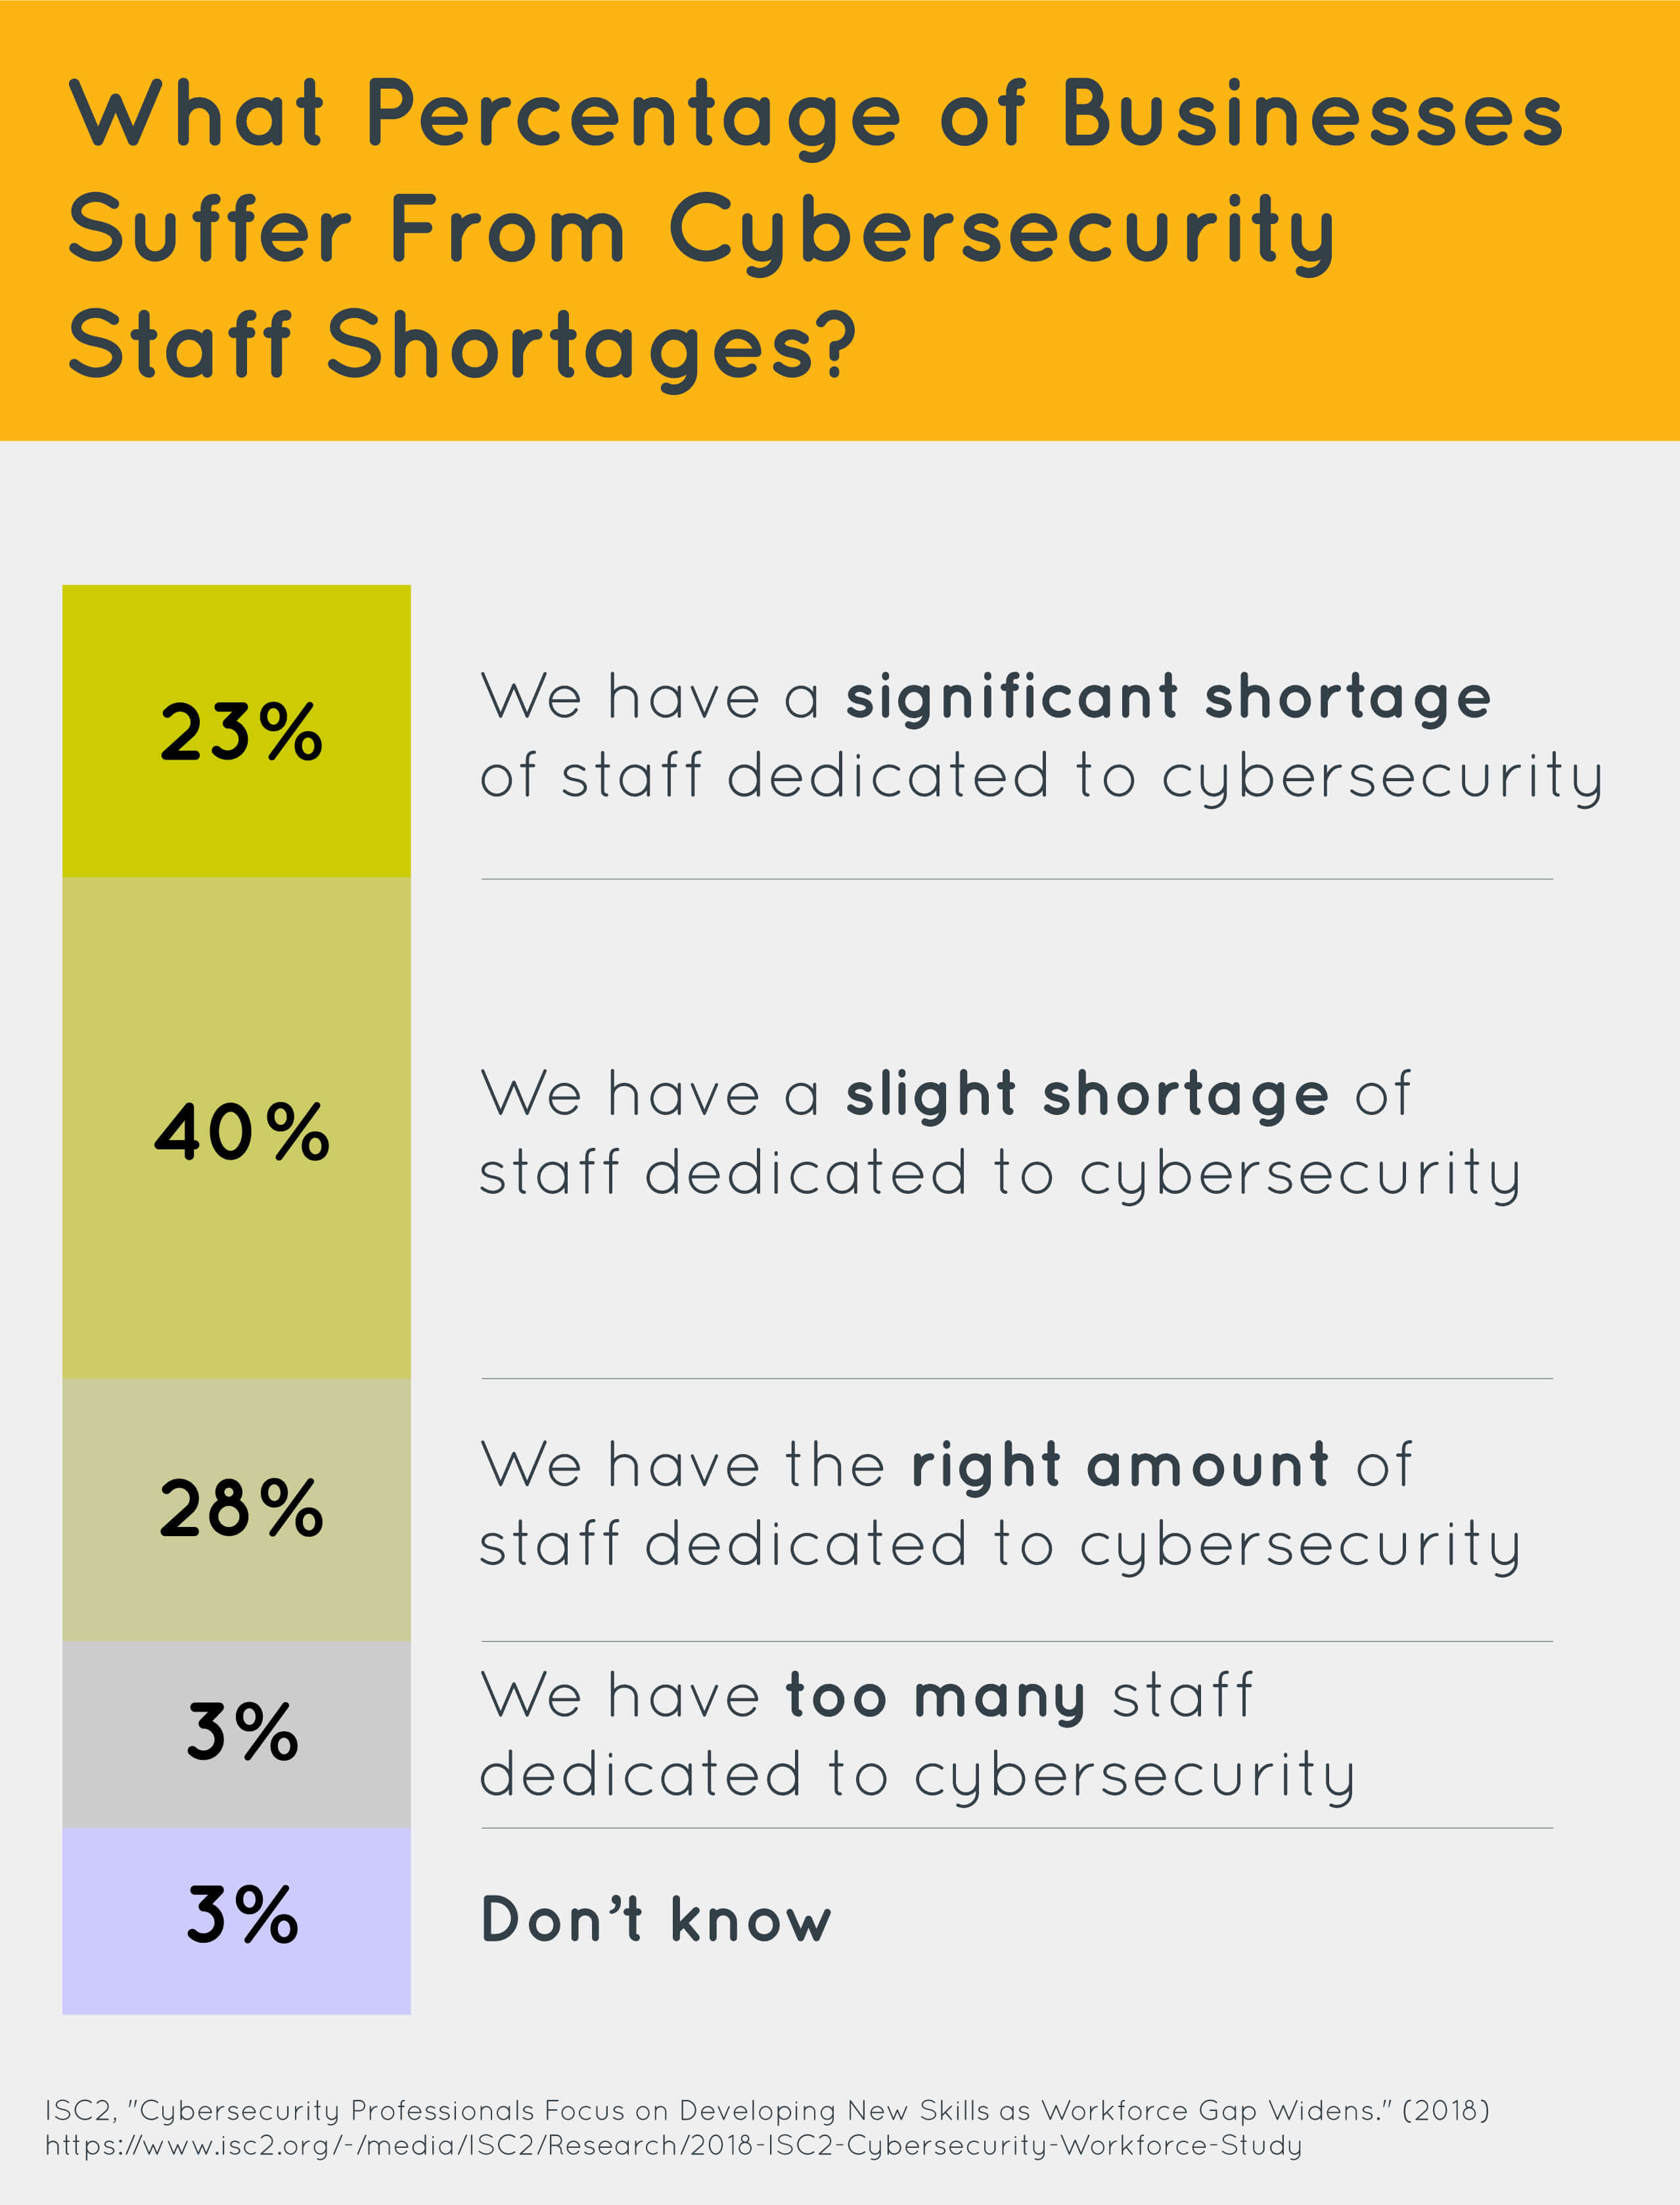 A graph that shows what percentage of businesses suffer from cybersecurity staff shortages